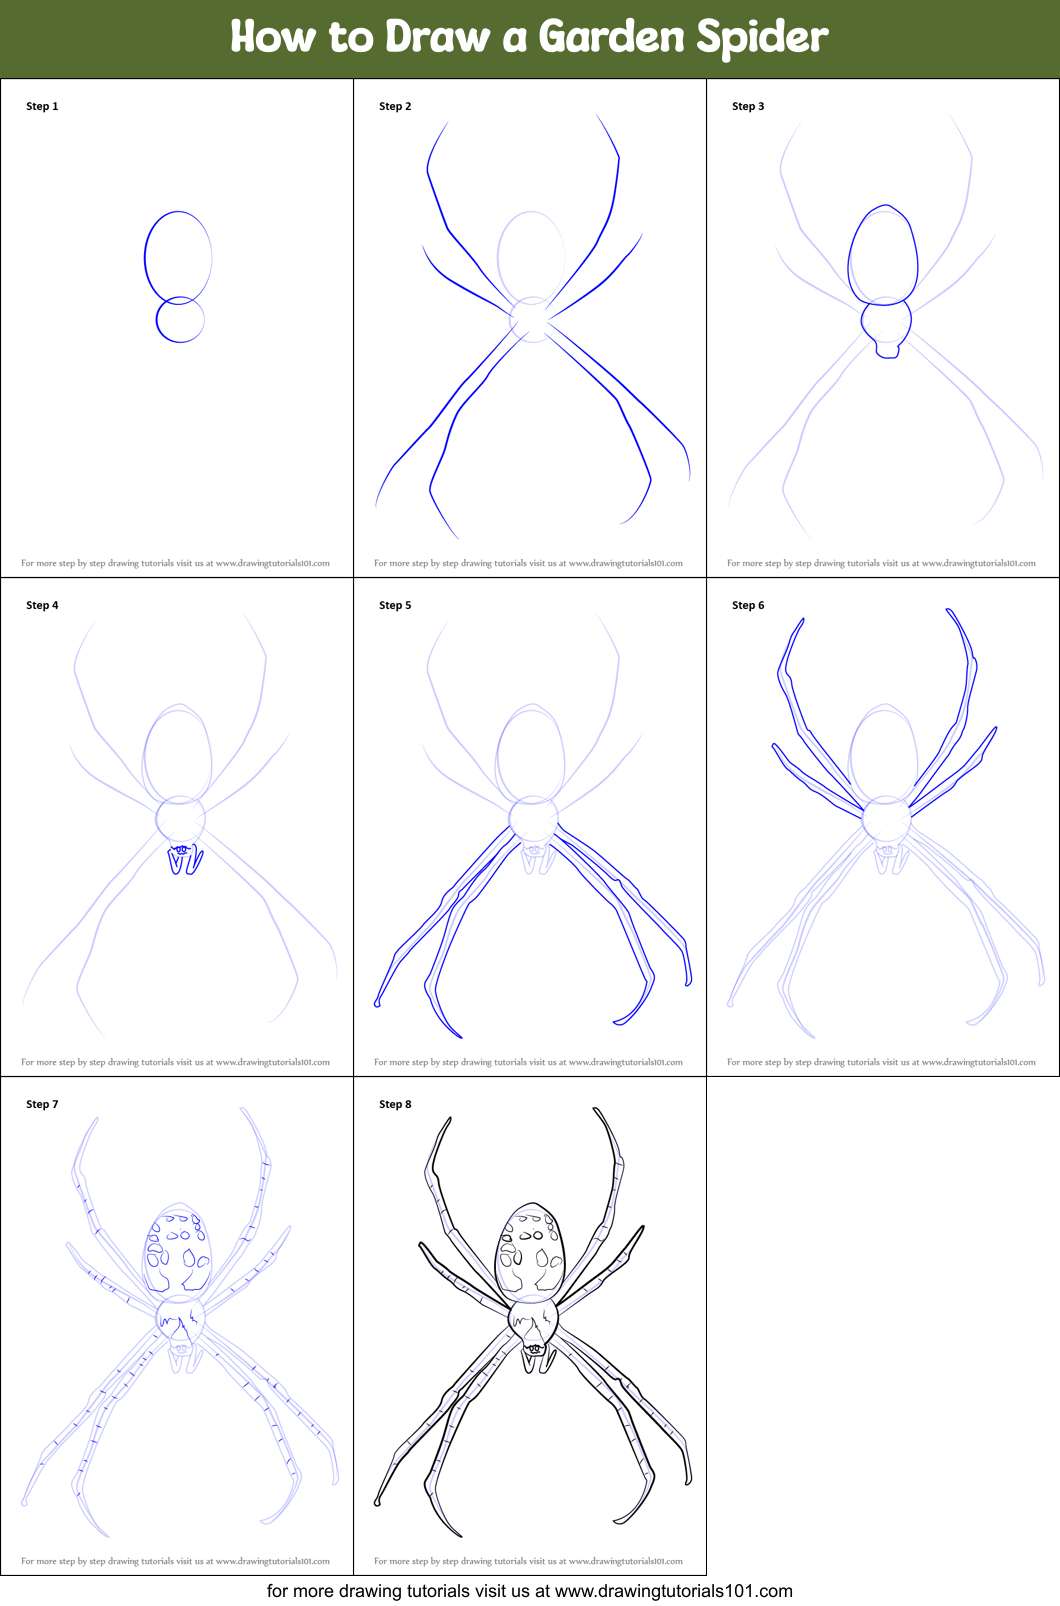 How to Draw a Garden Spider printable step by step drawing sheet